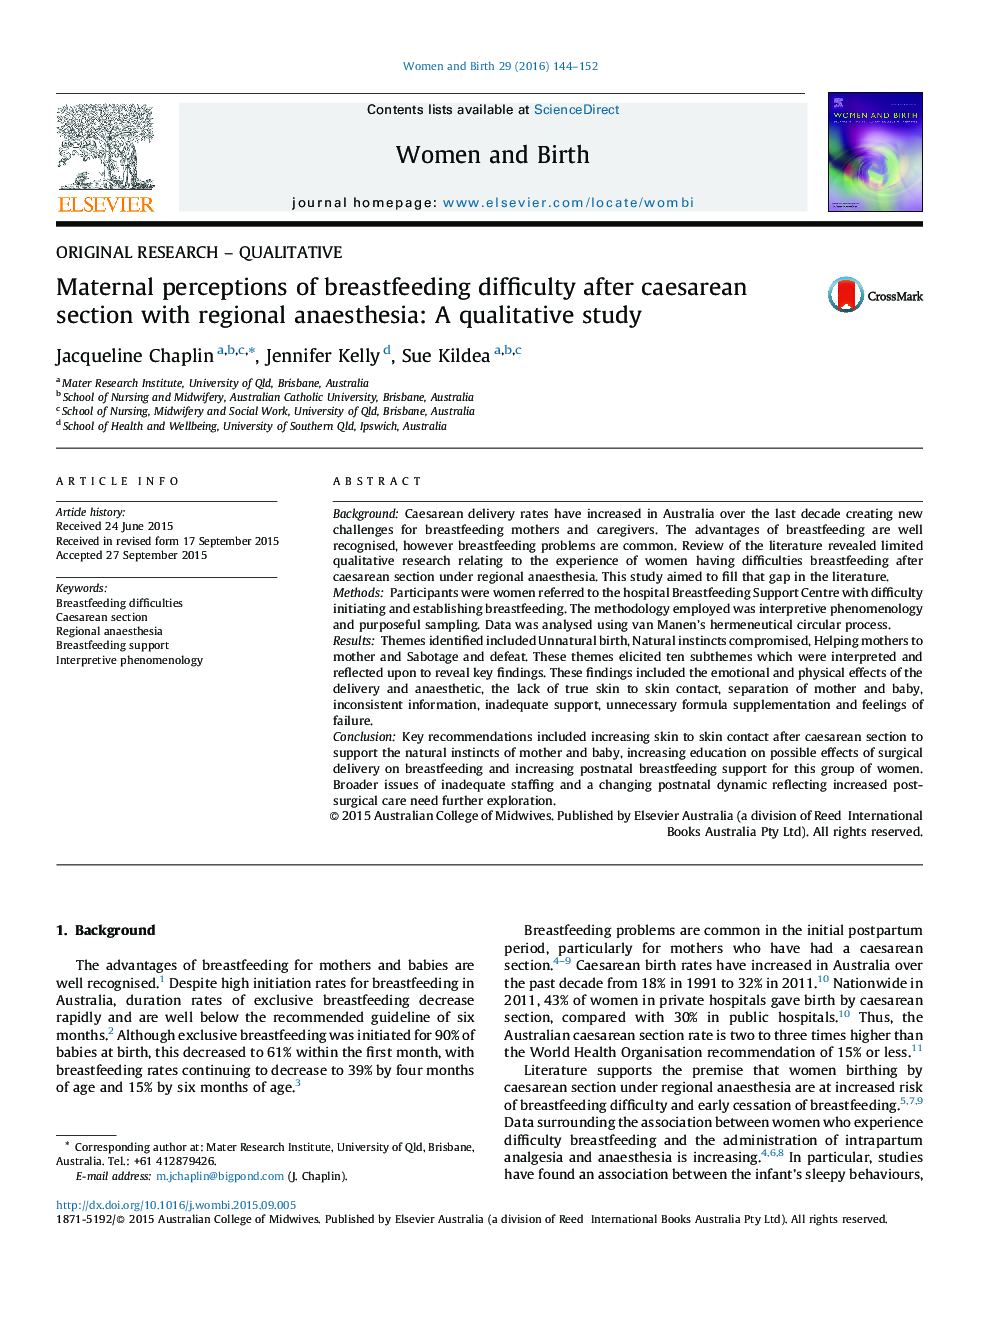 Maternal perceptions of breastfeeding difficulty after caesarean section with regional anaesthesia: A qualitative study